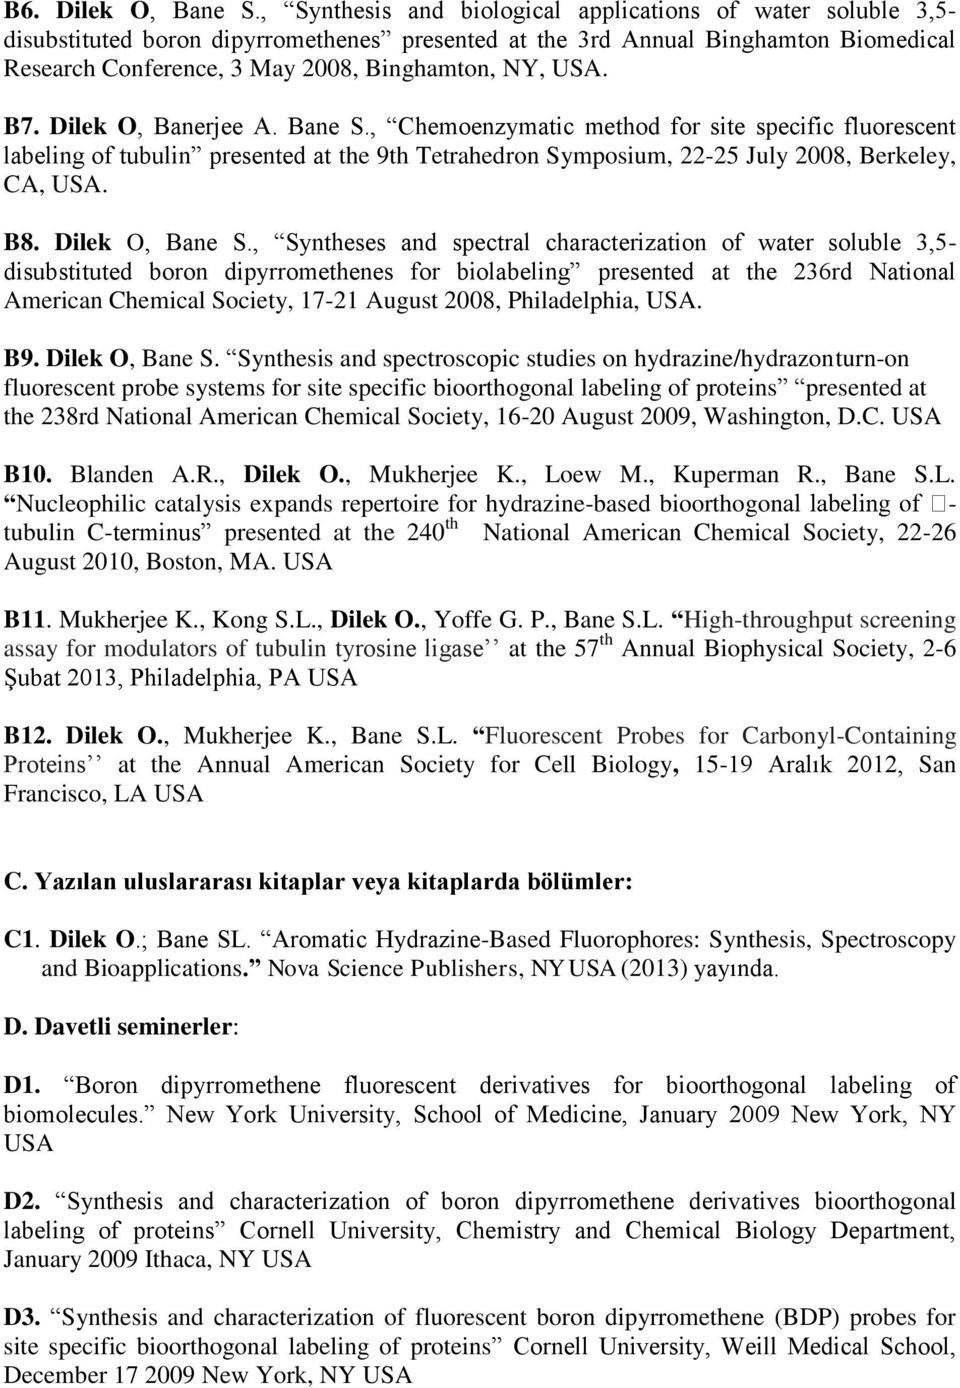 USA. B7. Dilek O, Banerjee A. Bane S., Chemoenzymatic method for site specific fluorescent labeling of tubulin presented at the 9th Tetrahedron Symposium, 22-25 July 2008, Berkeley, CA, USA. B8.